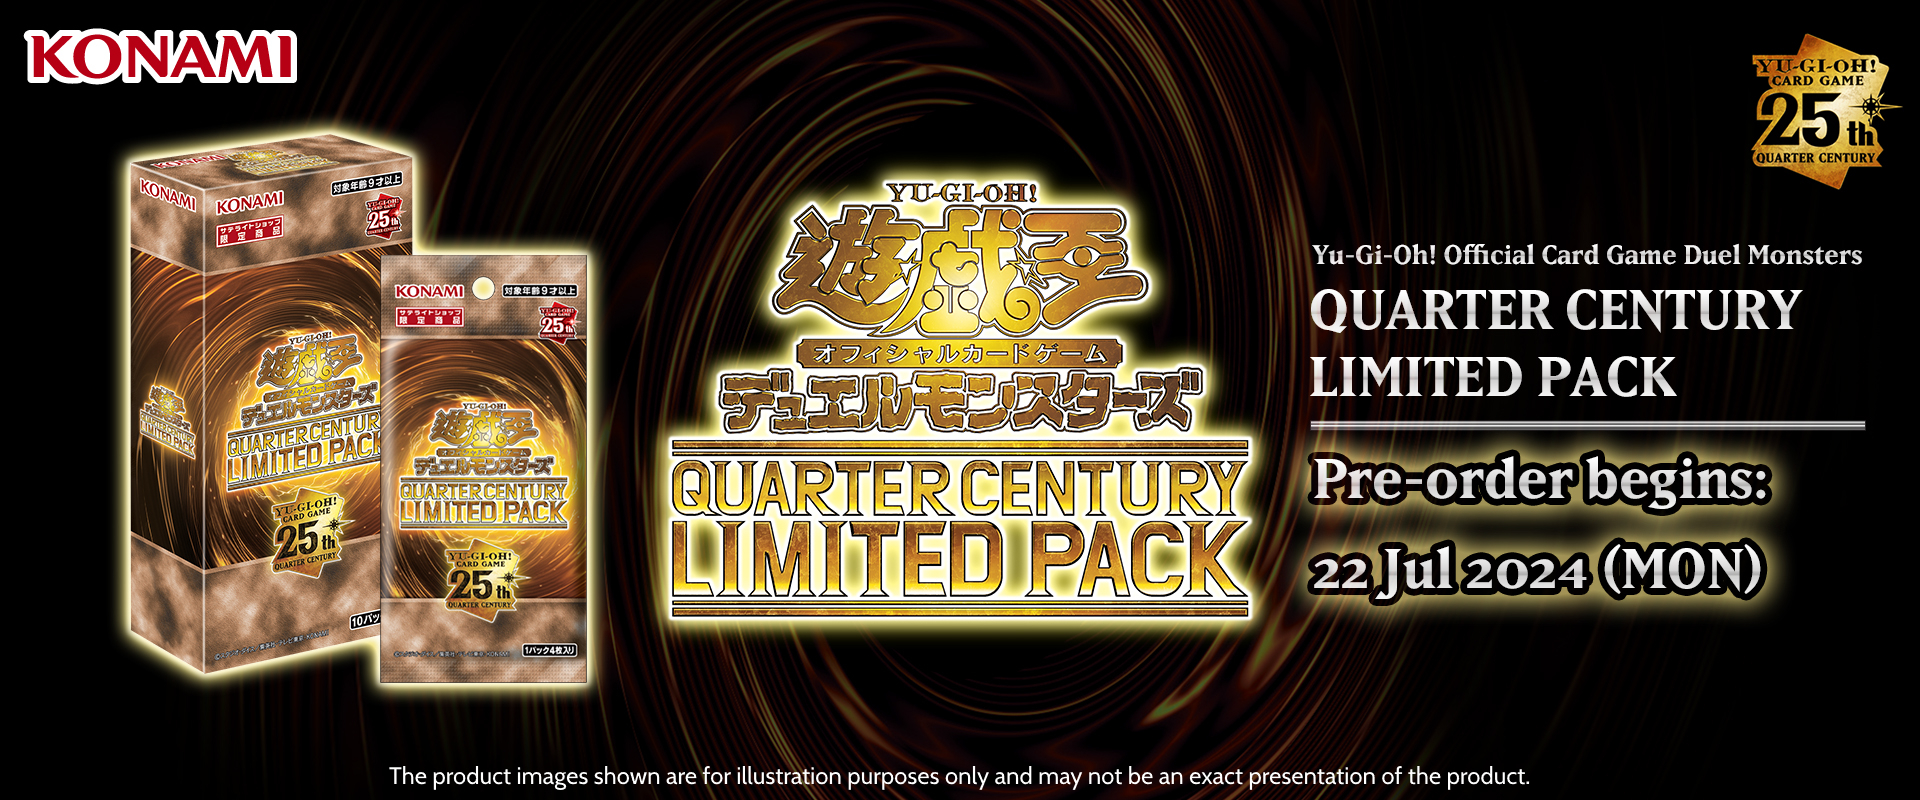 Yu-Gi-Oh! Official Card Game Duel Monsters QUARTER CENTURY LIMITED PACK